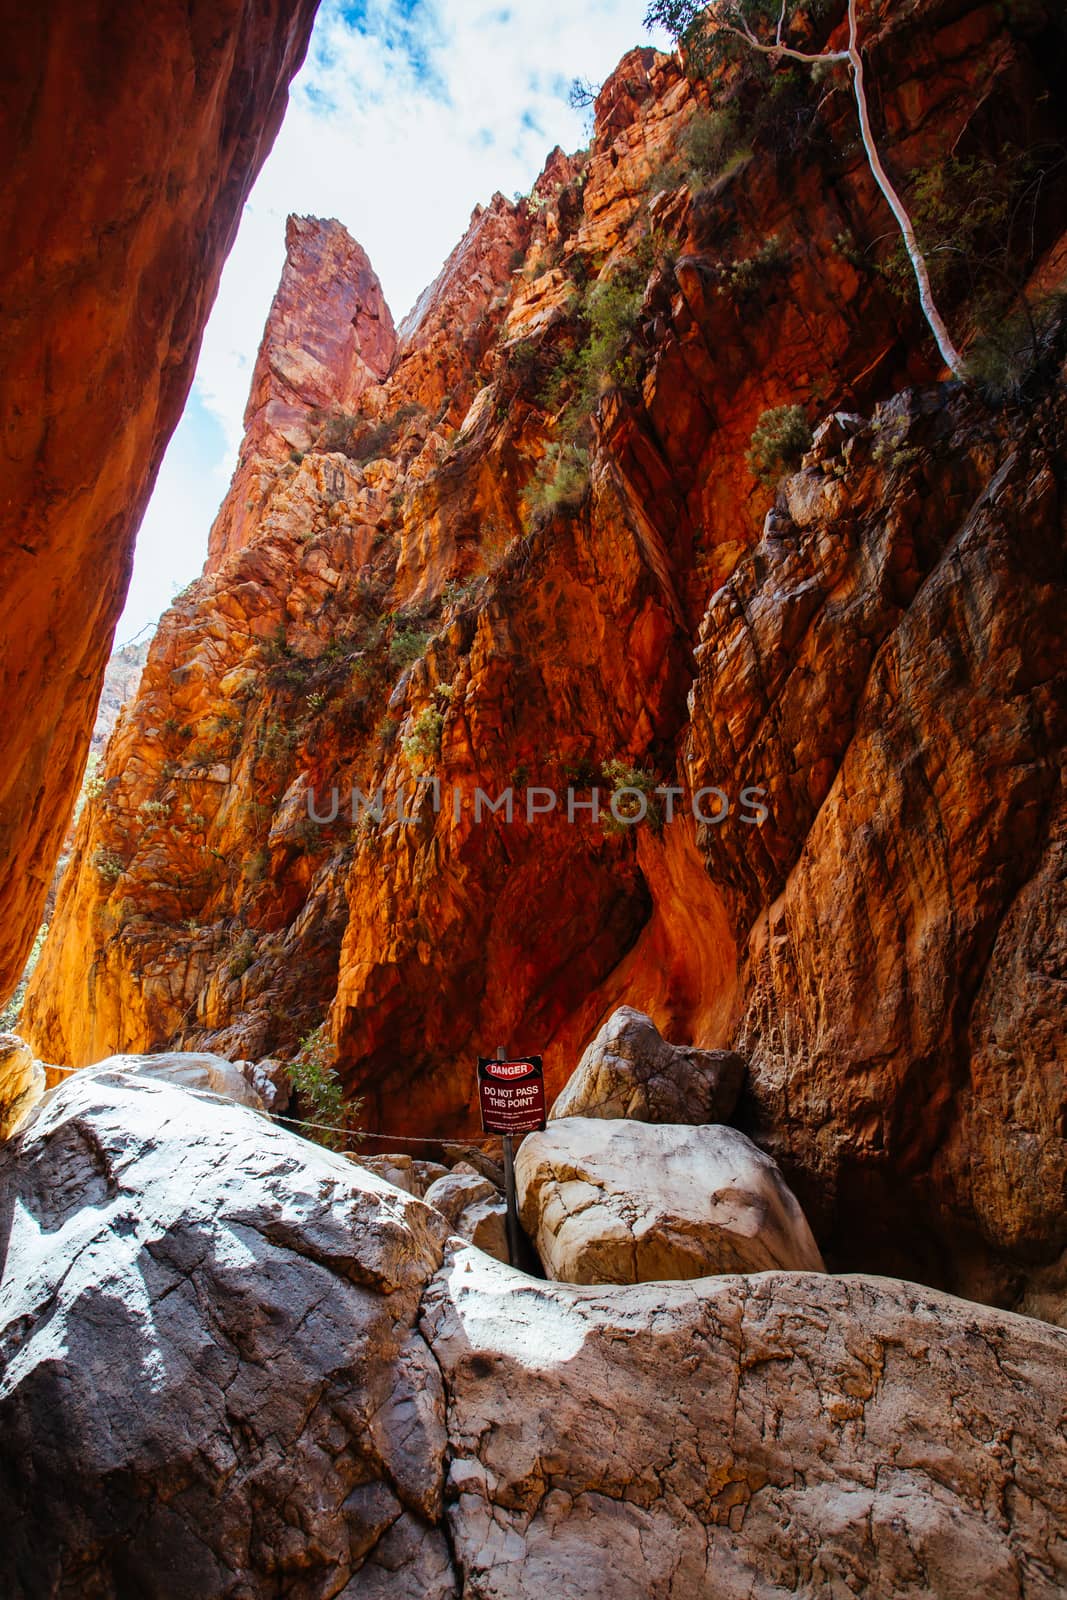 The iconic Standley Chasm and its fascinating rock formations in MacDonnell Ranges National Park, near Alice Springs in the Northern Territory, Australia